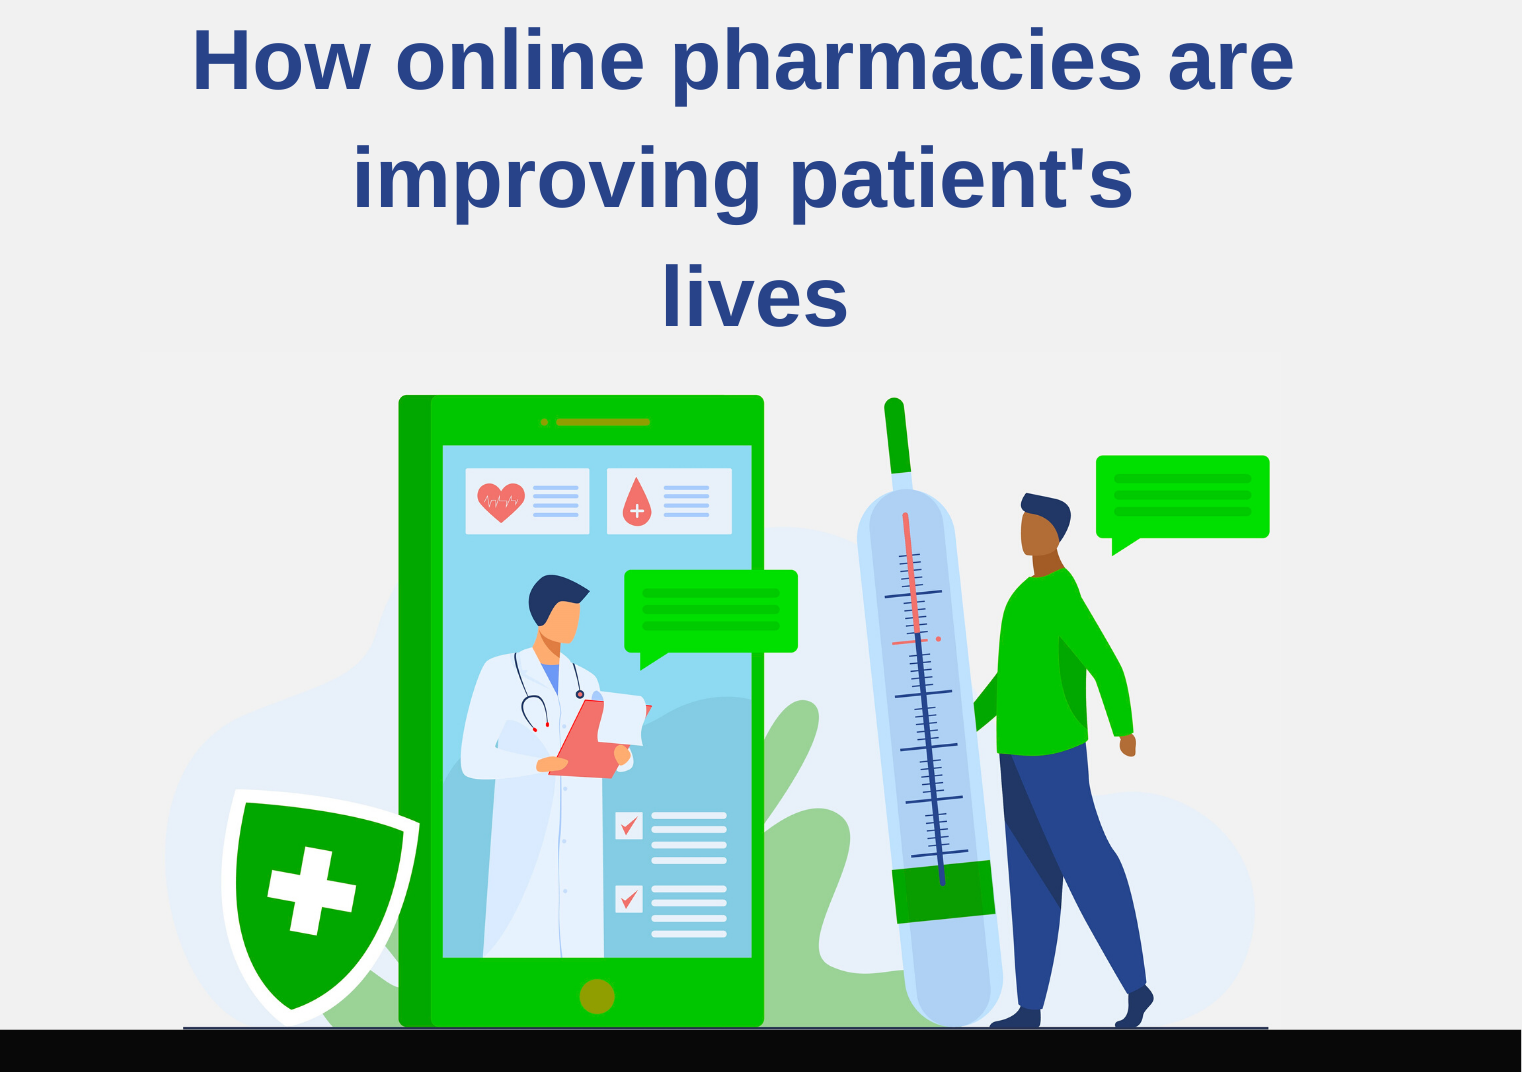 How online pharmacies are improving patient's lives